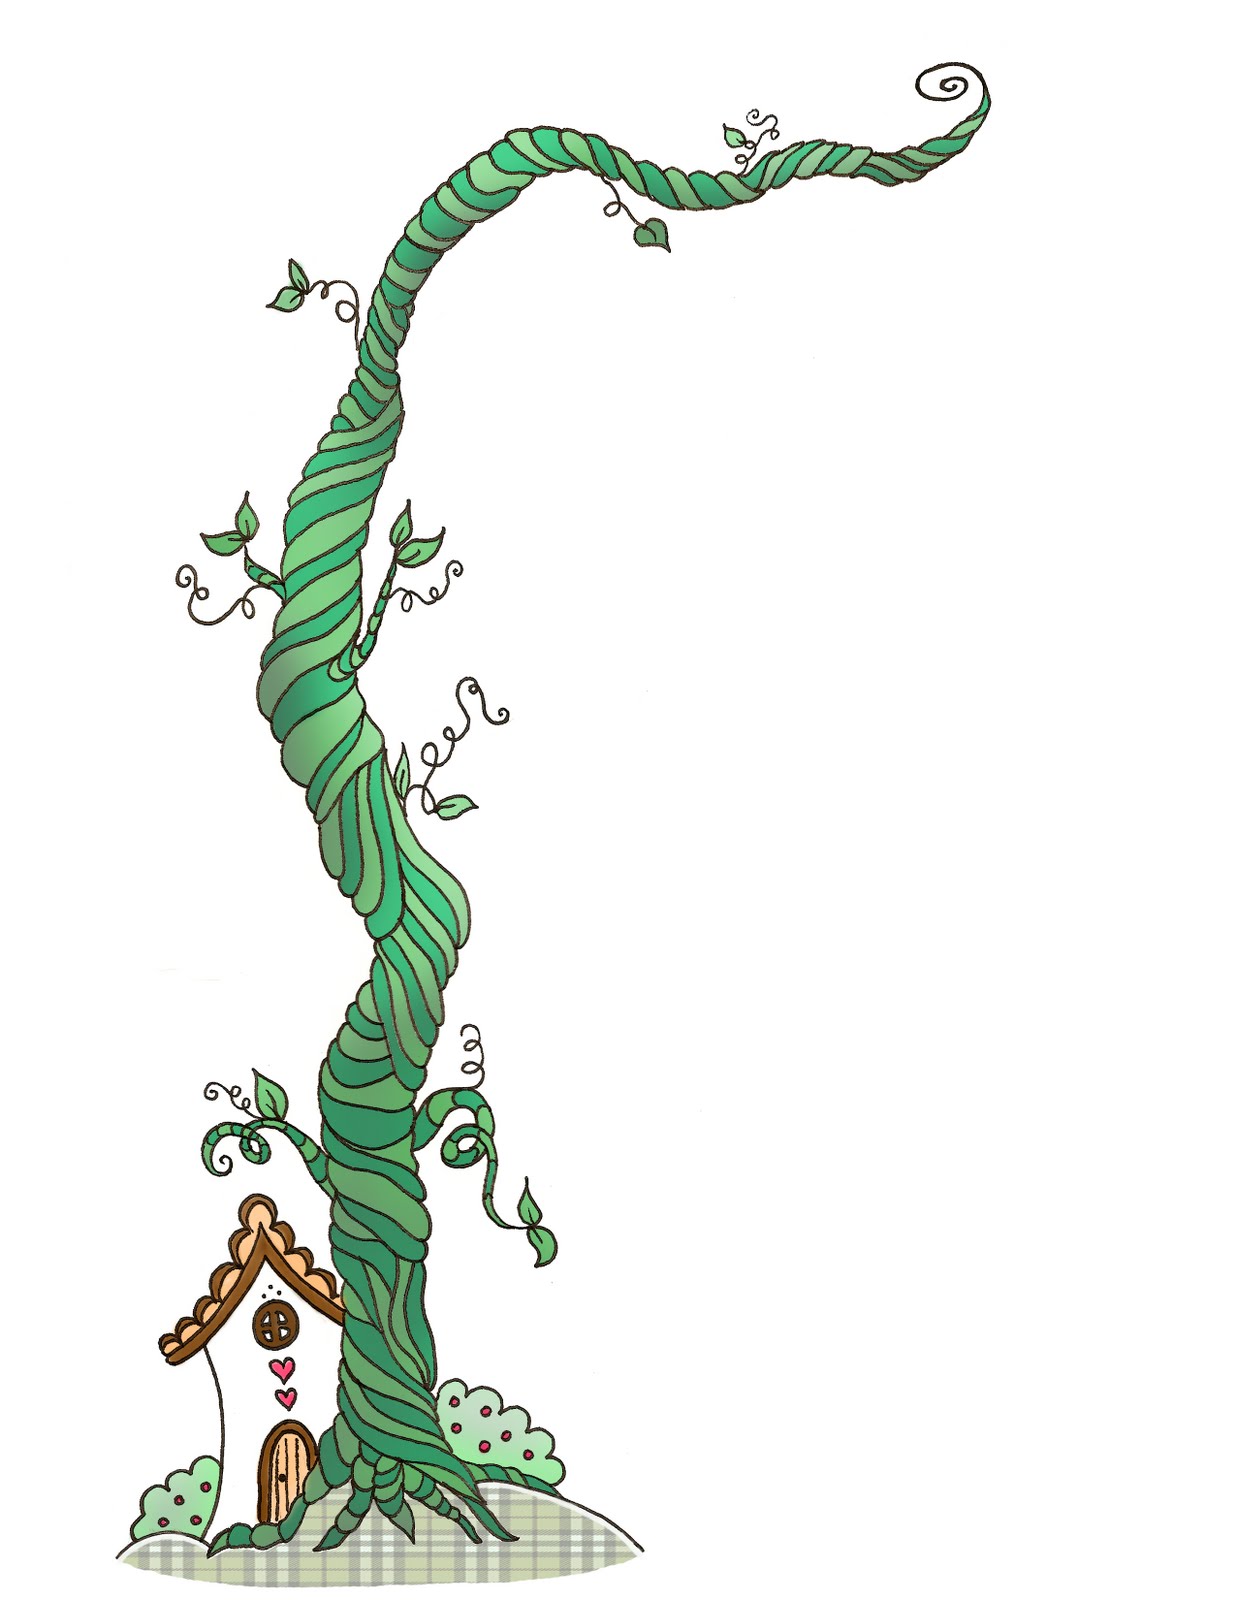 Jack From Jack And The Beanstalk - ClipArt Best